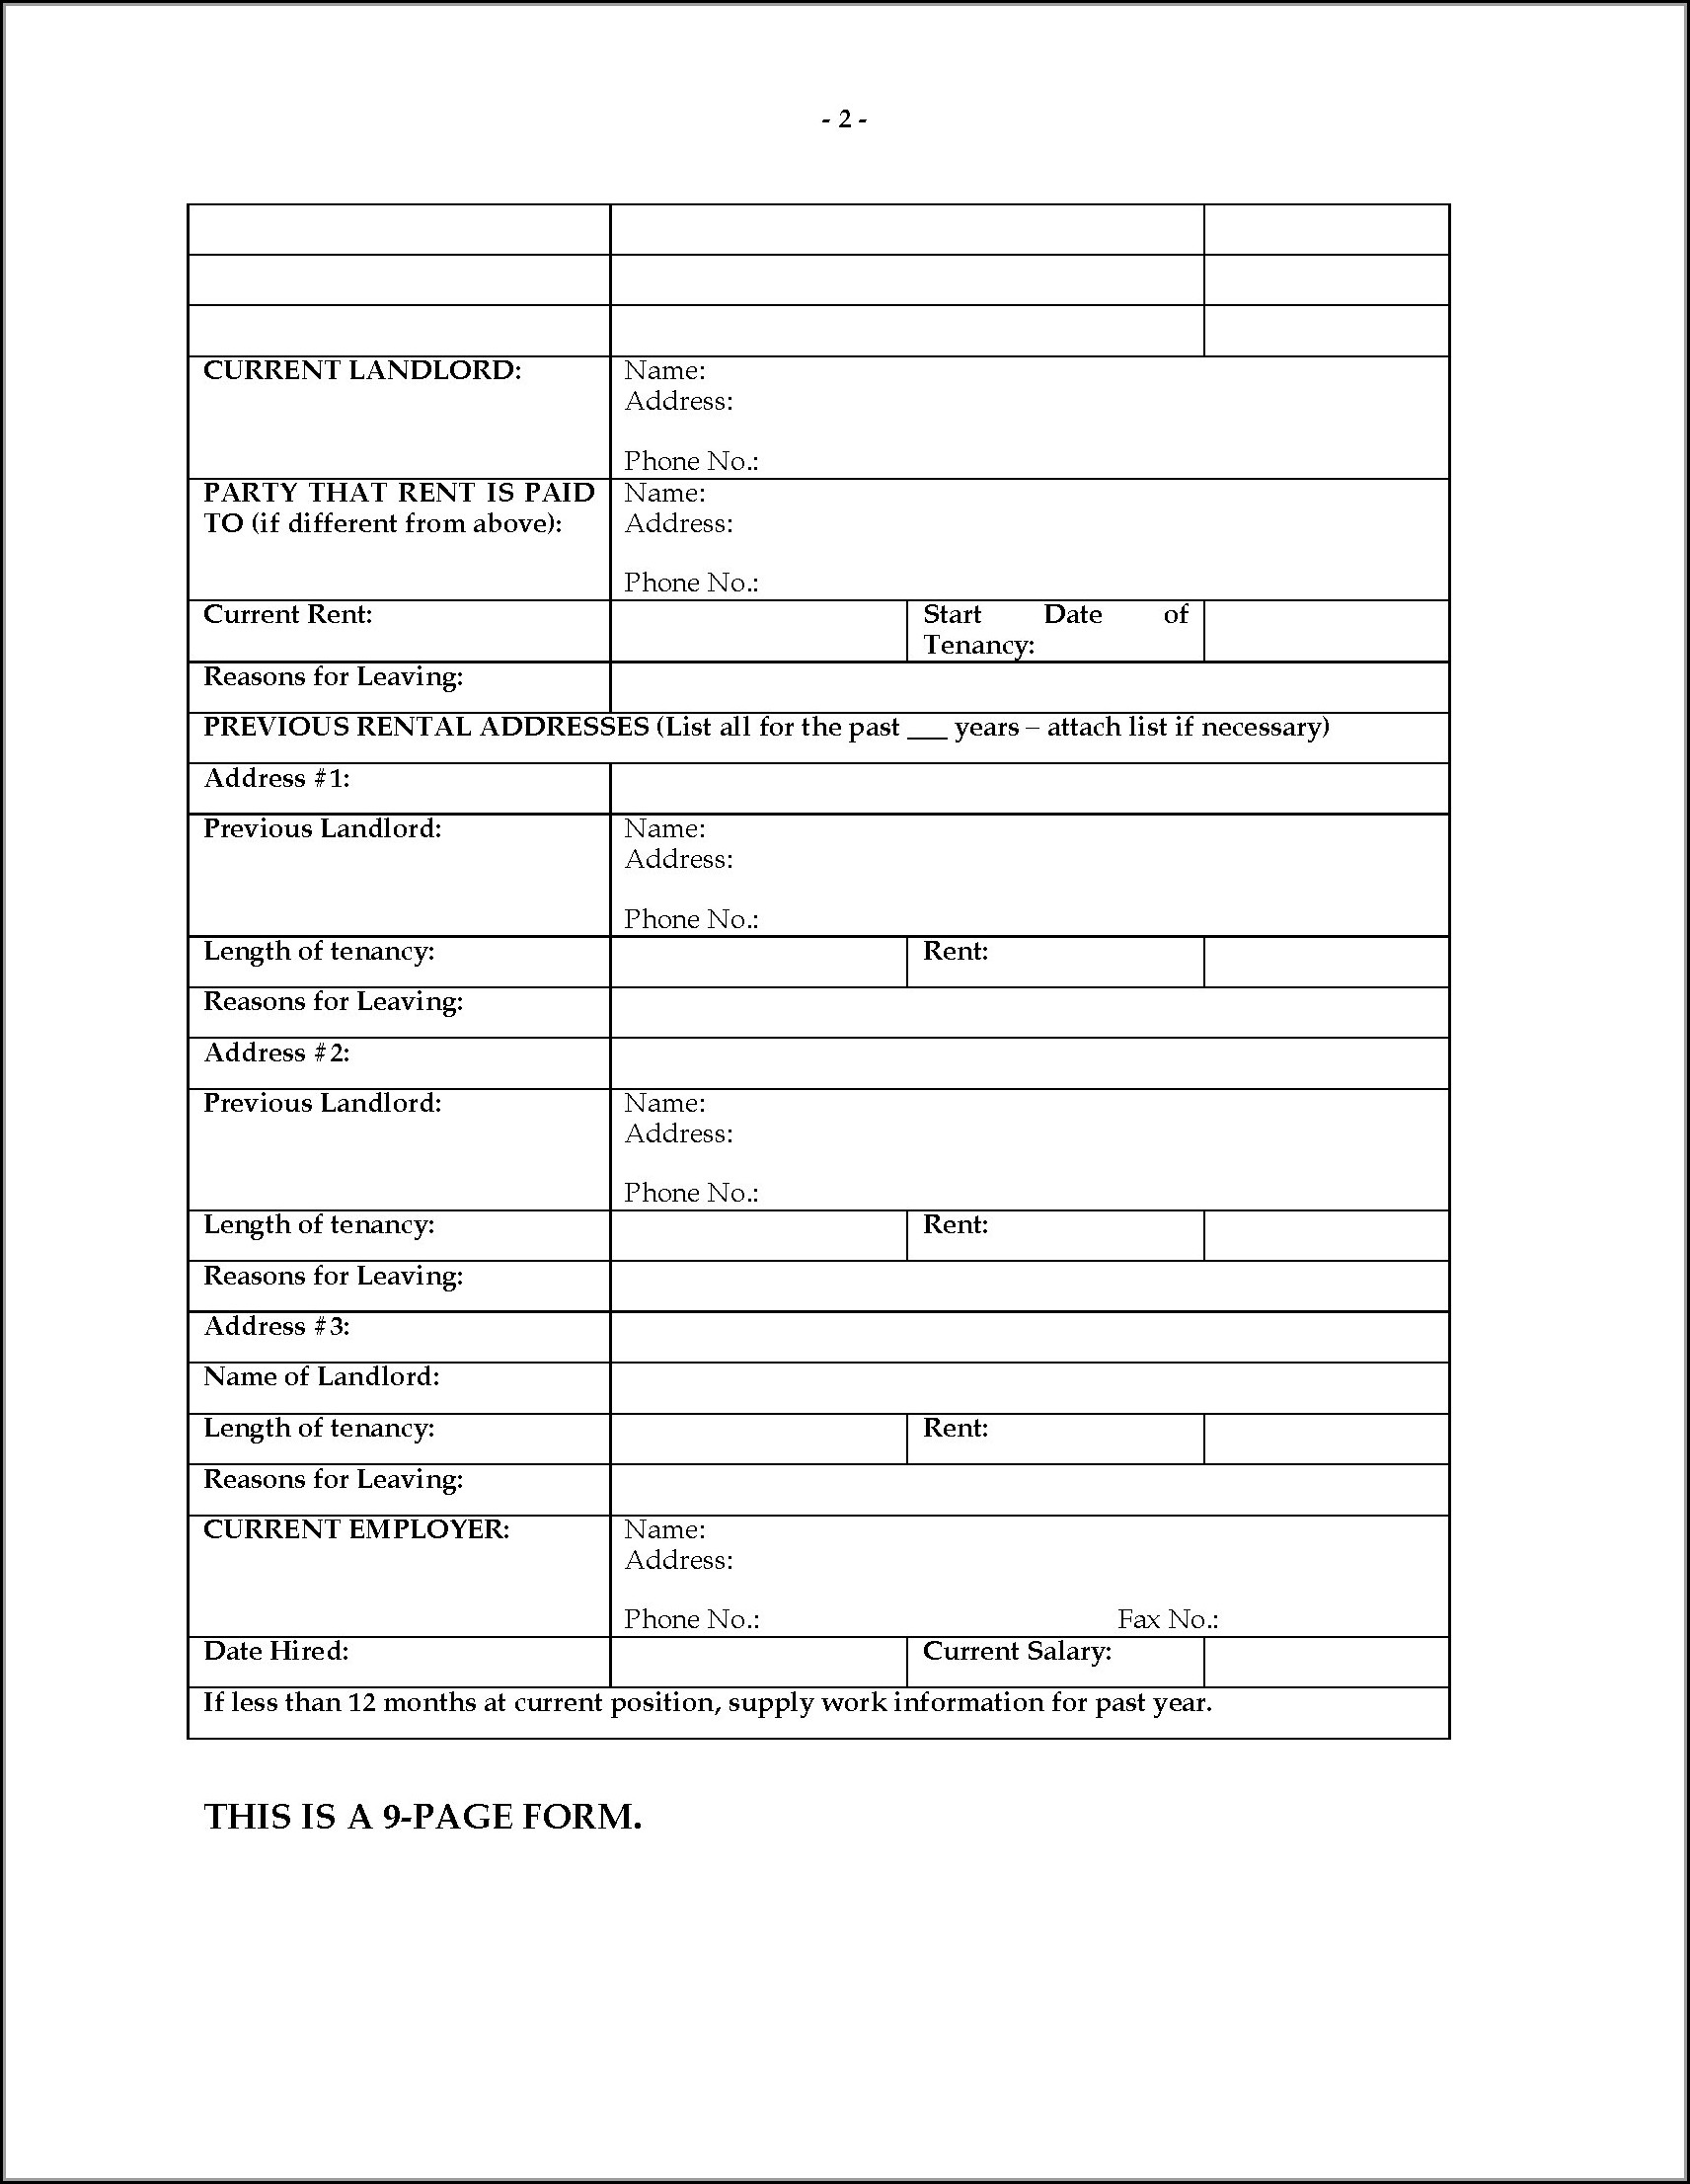 rental-application-forms-ontario-form-resume-examples-a6ynjajybg